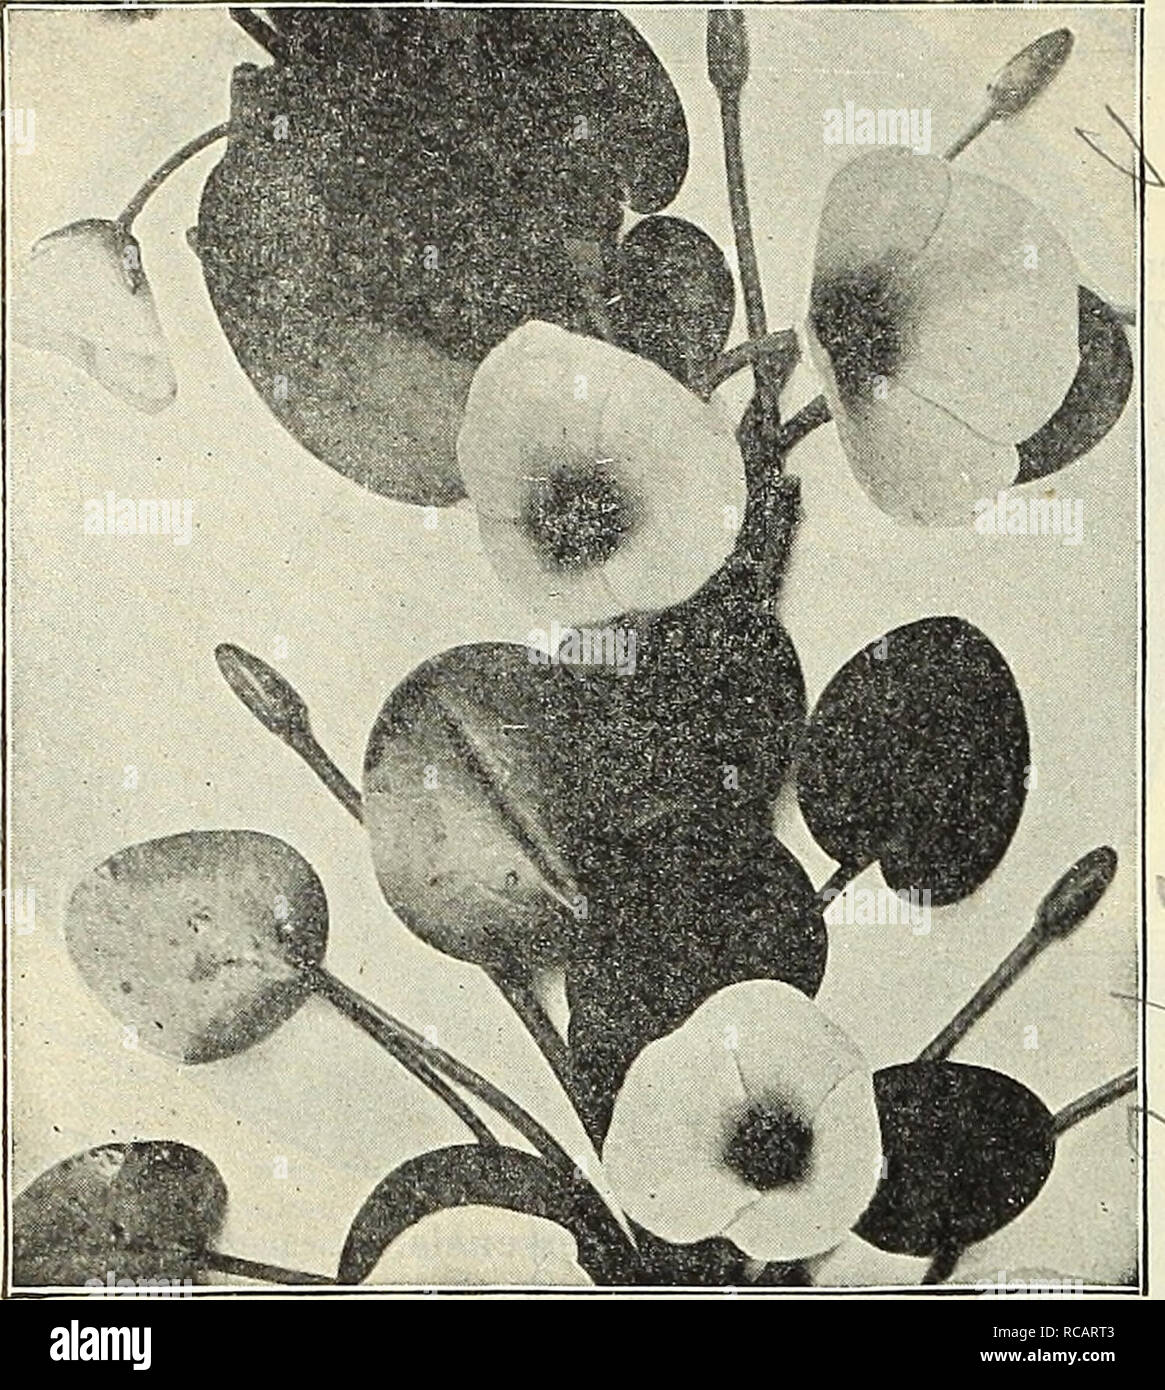 . Dreer's 1838 1908 garden book. Seeds Catalogs; Nursery stock Catalogs; Gardening Equipment and supplies Catalogs; Flowers Seeds Catalogs; Vegetables Seeds Catalogs; Fruit Seeds Catalogs. 234 nhHENRTADRKK WIlADELPHIA^'AWl WATER LILIES-^ AQUATICS. LlMNOCHRIS HUMBOLDTI (WatER PoPPY). (Offered on next Page.) Miscellaneous Aquatics. Stif a/so tiiuiey Aqiiarimn Planls on nextpa«e. AcoruS Japonica VarJegata {Variegated Sweet Flag). One of Uie nnest variei^'ated plants in cultivation. 25 cts. each ; $2 50 per doz. — Qrarnineus VariegatuS. Dwarf-growing with leathery leaves, beautifully maigined wit Stock Photo